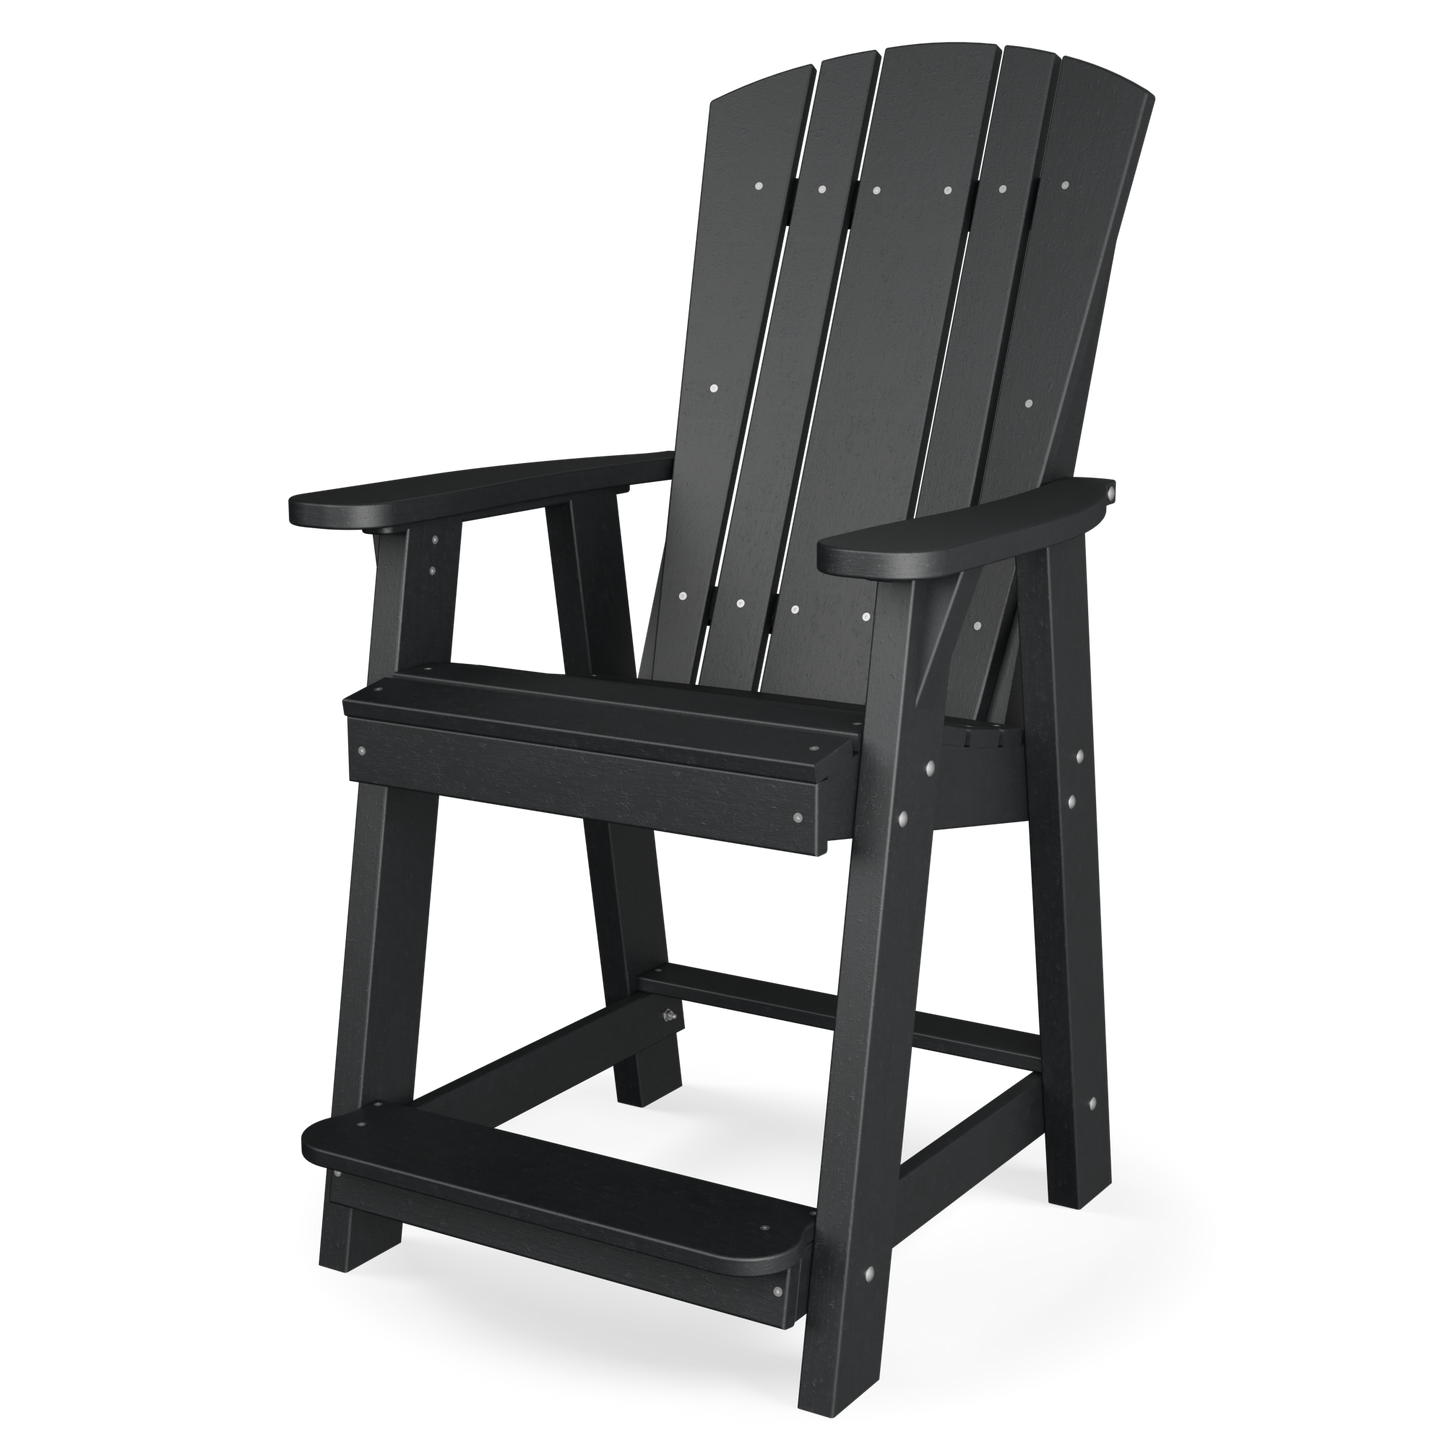 Wildridge Recycled Plastic Heritage Adirondack Balcony Chair (COUNTER HEIGHT) - LEAD TIME TO SHIP 6 WEEKS OR LESS